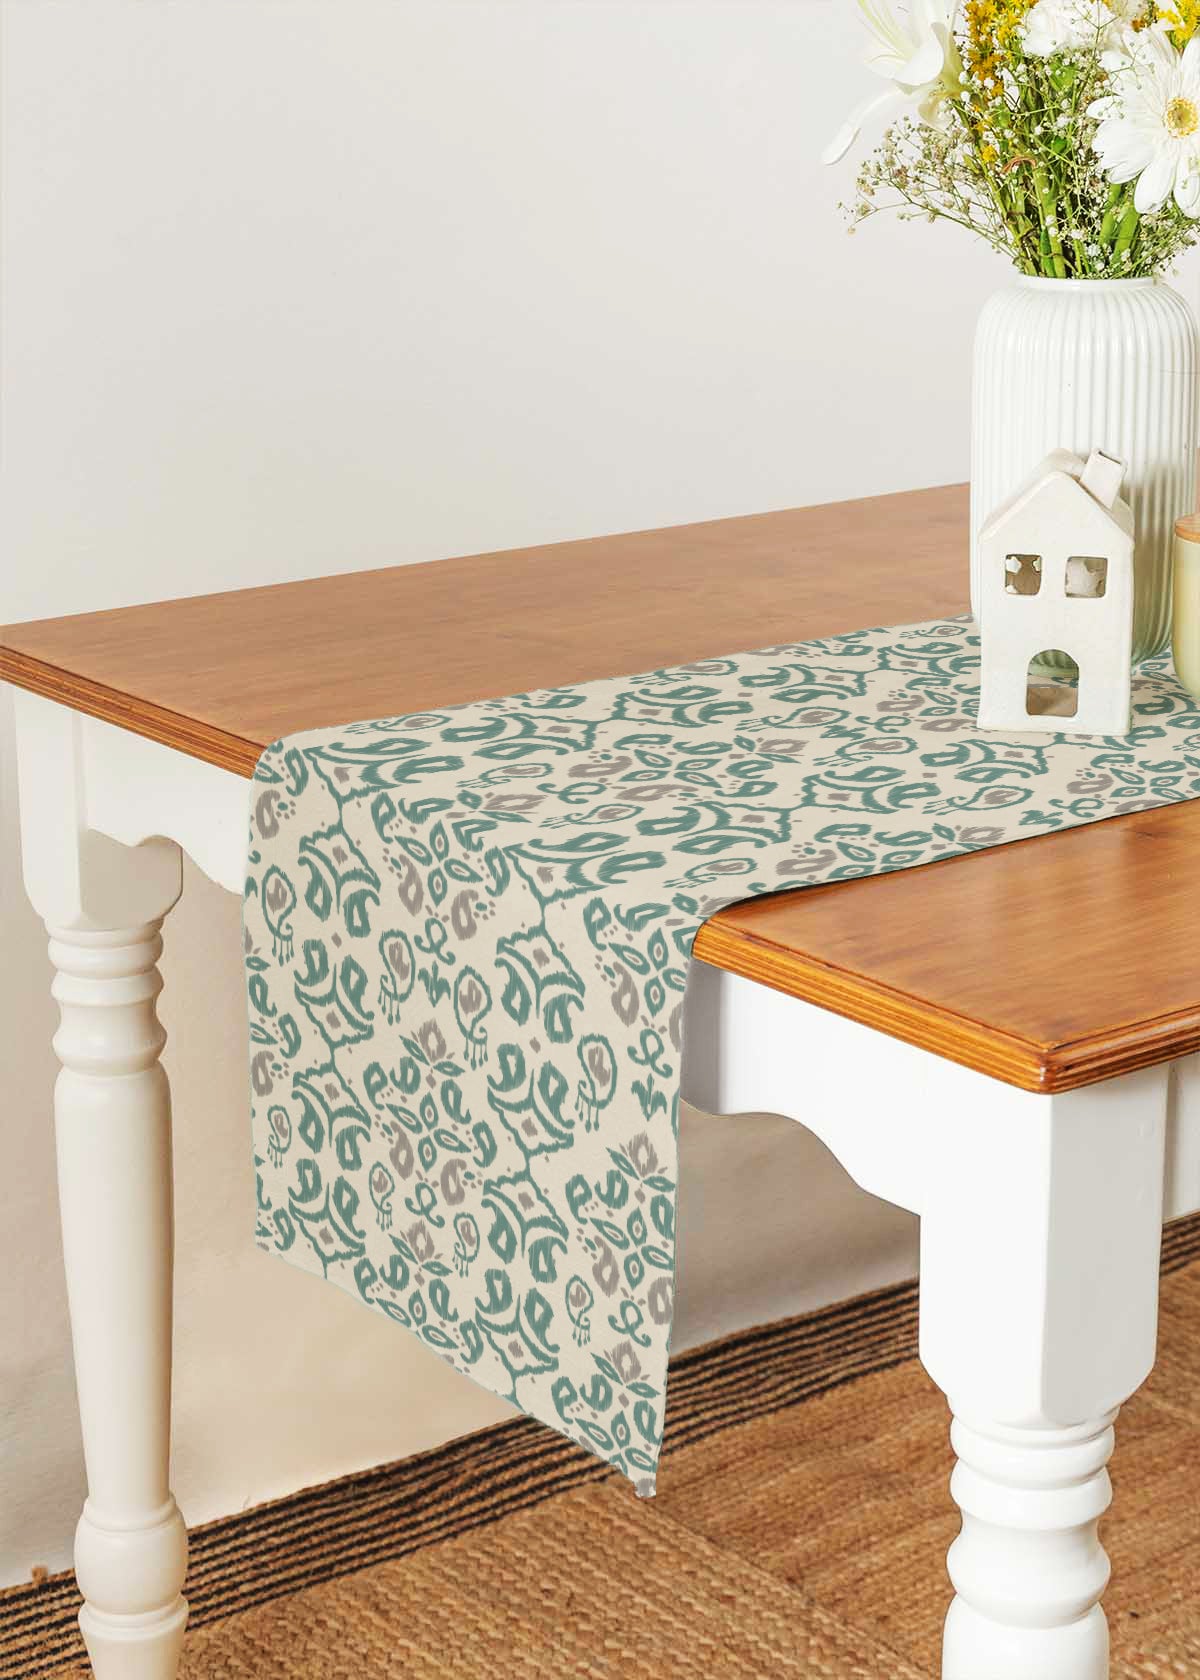 Spice route 100% cotton elegant table runner for 4 seater or 6 seater Dining with tassels - Multicolor